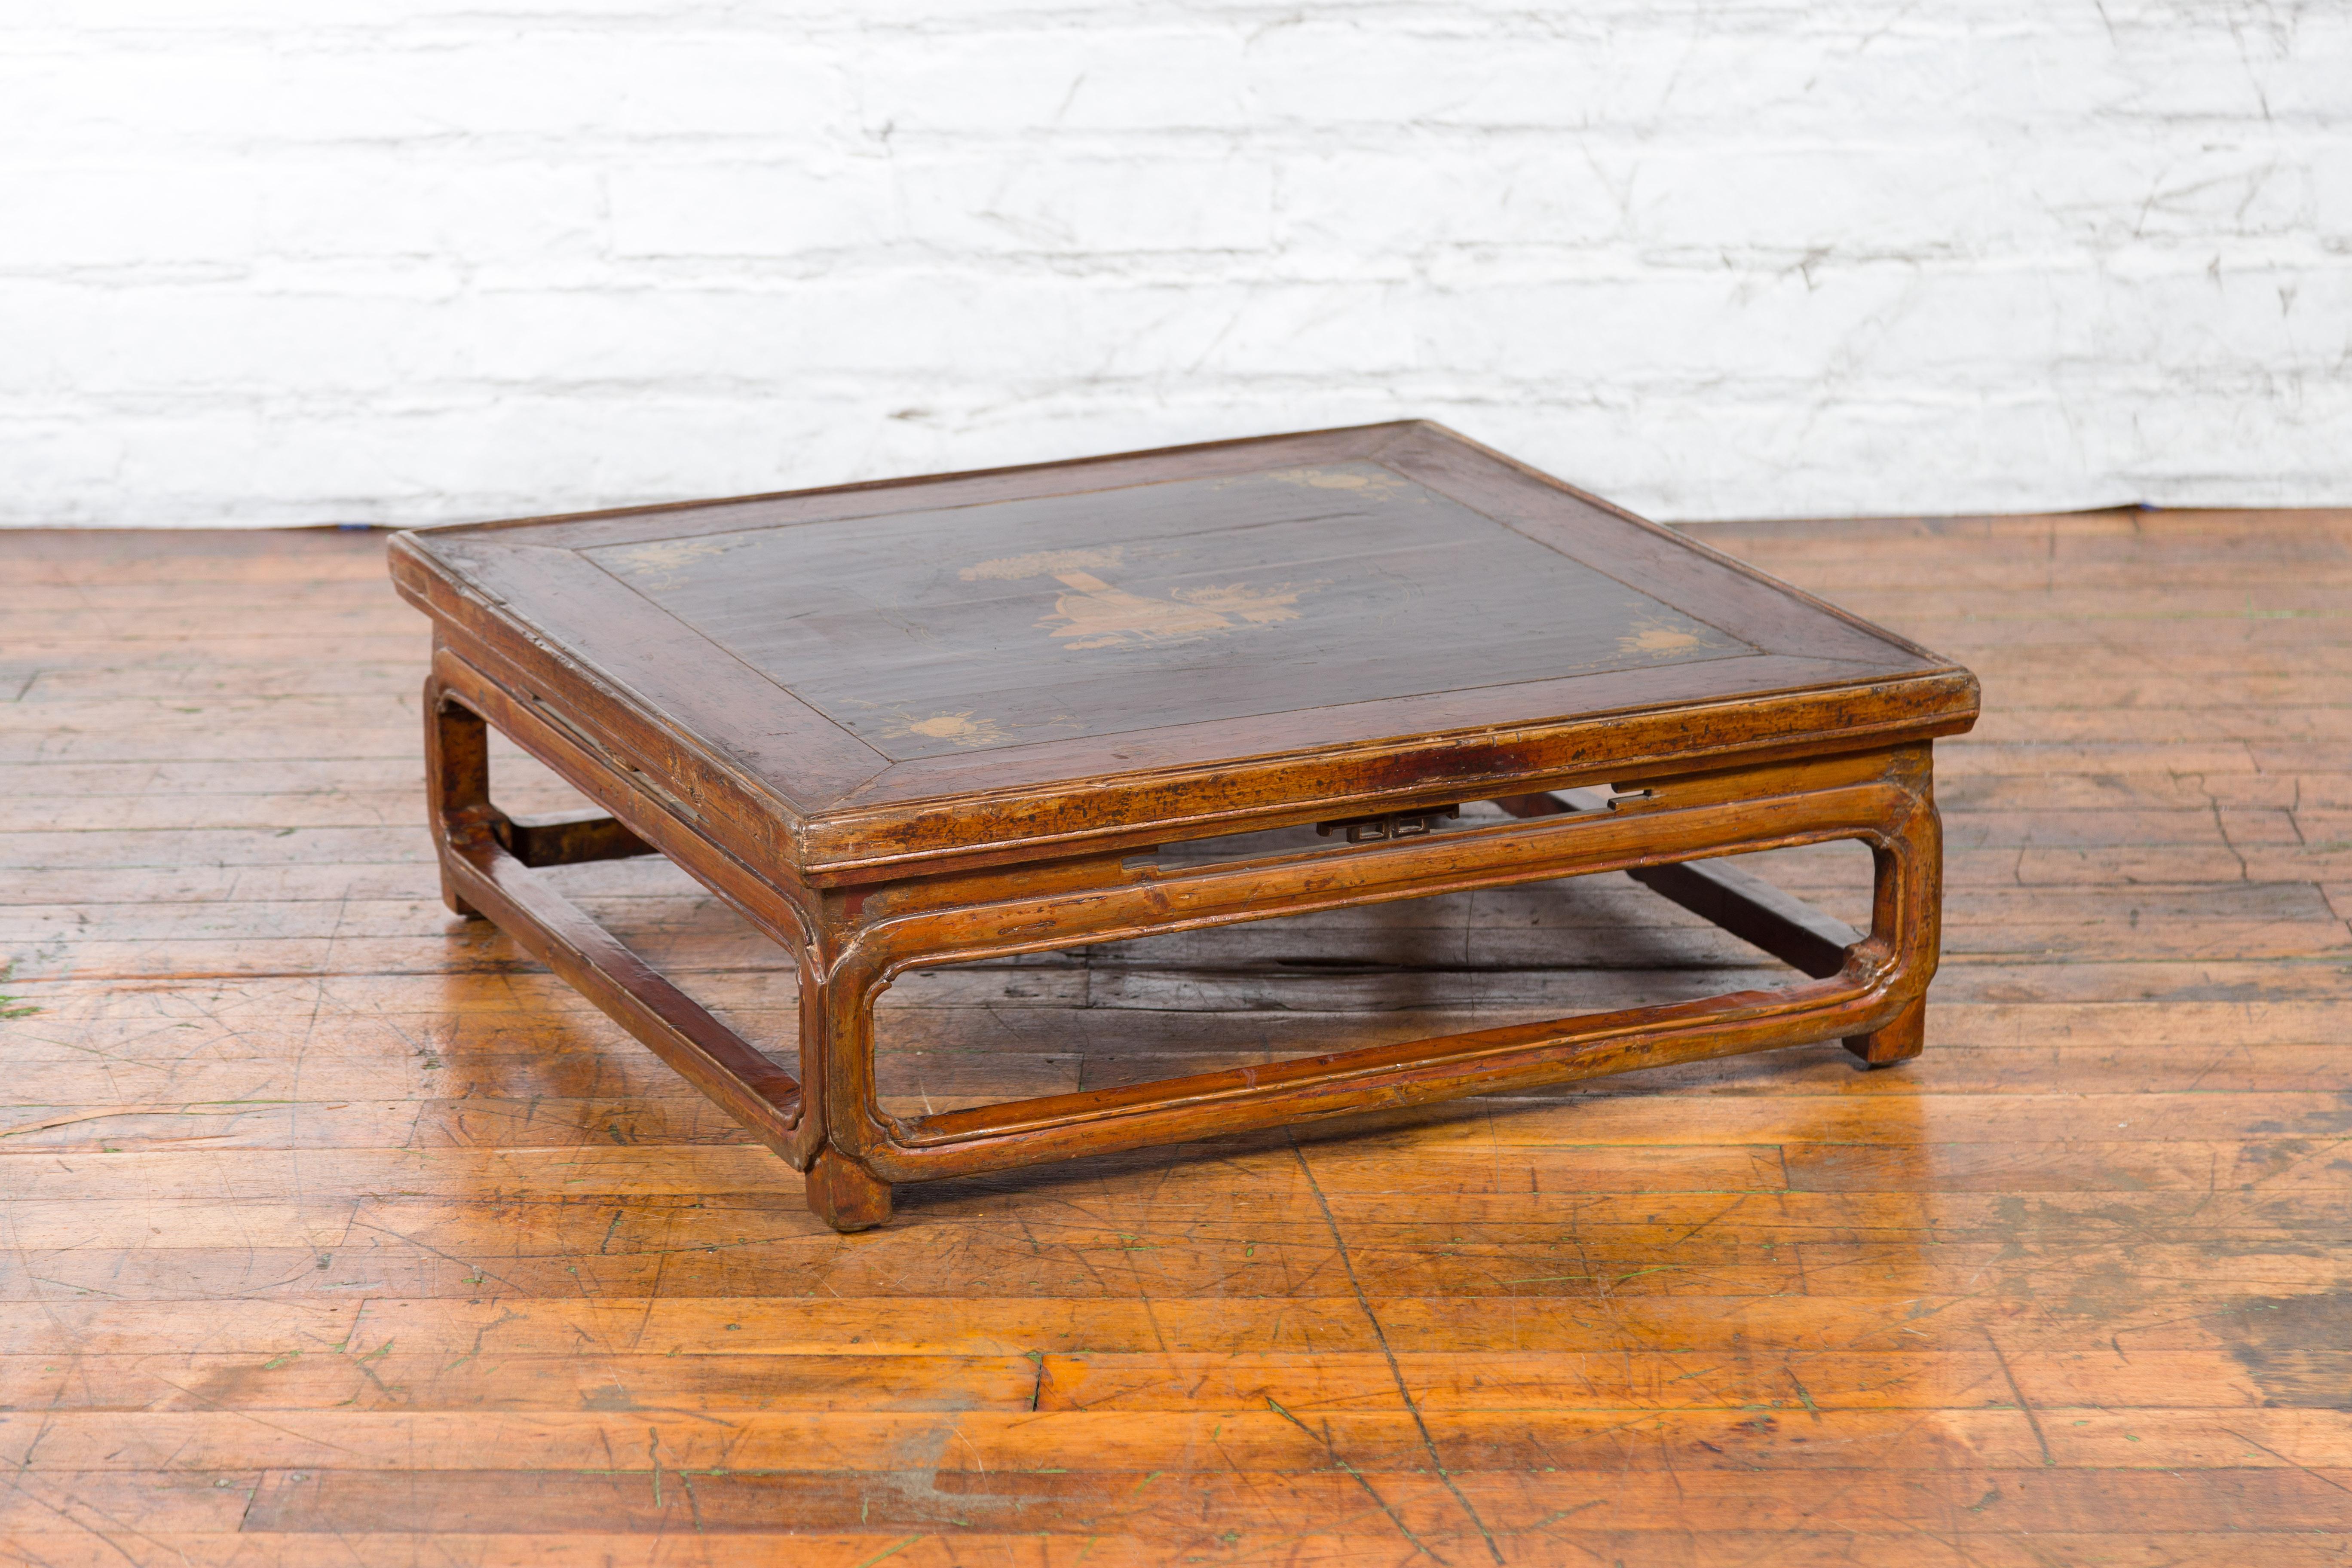 Qing Dynasty 19th Century Chinese Low Kang Coffee Table with Painted Décor For Sale 4